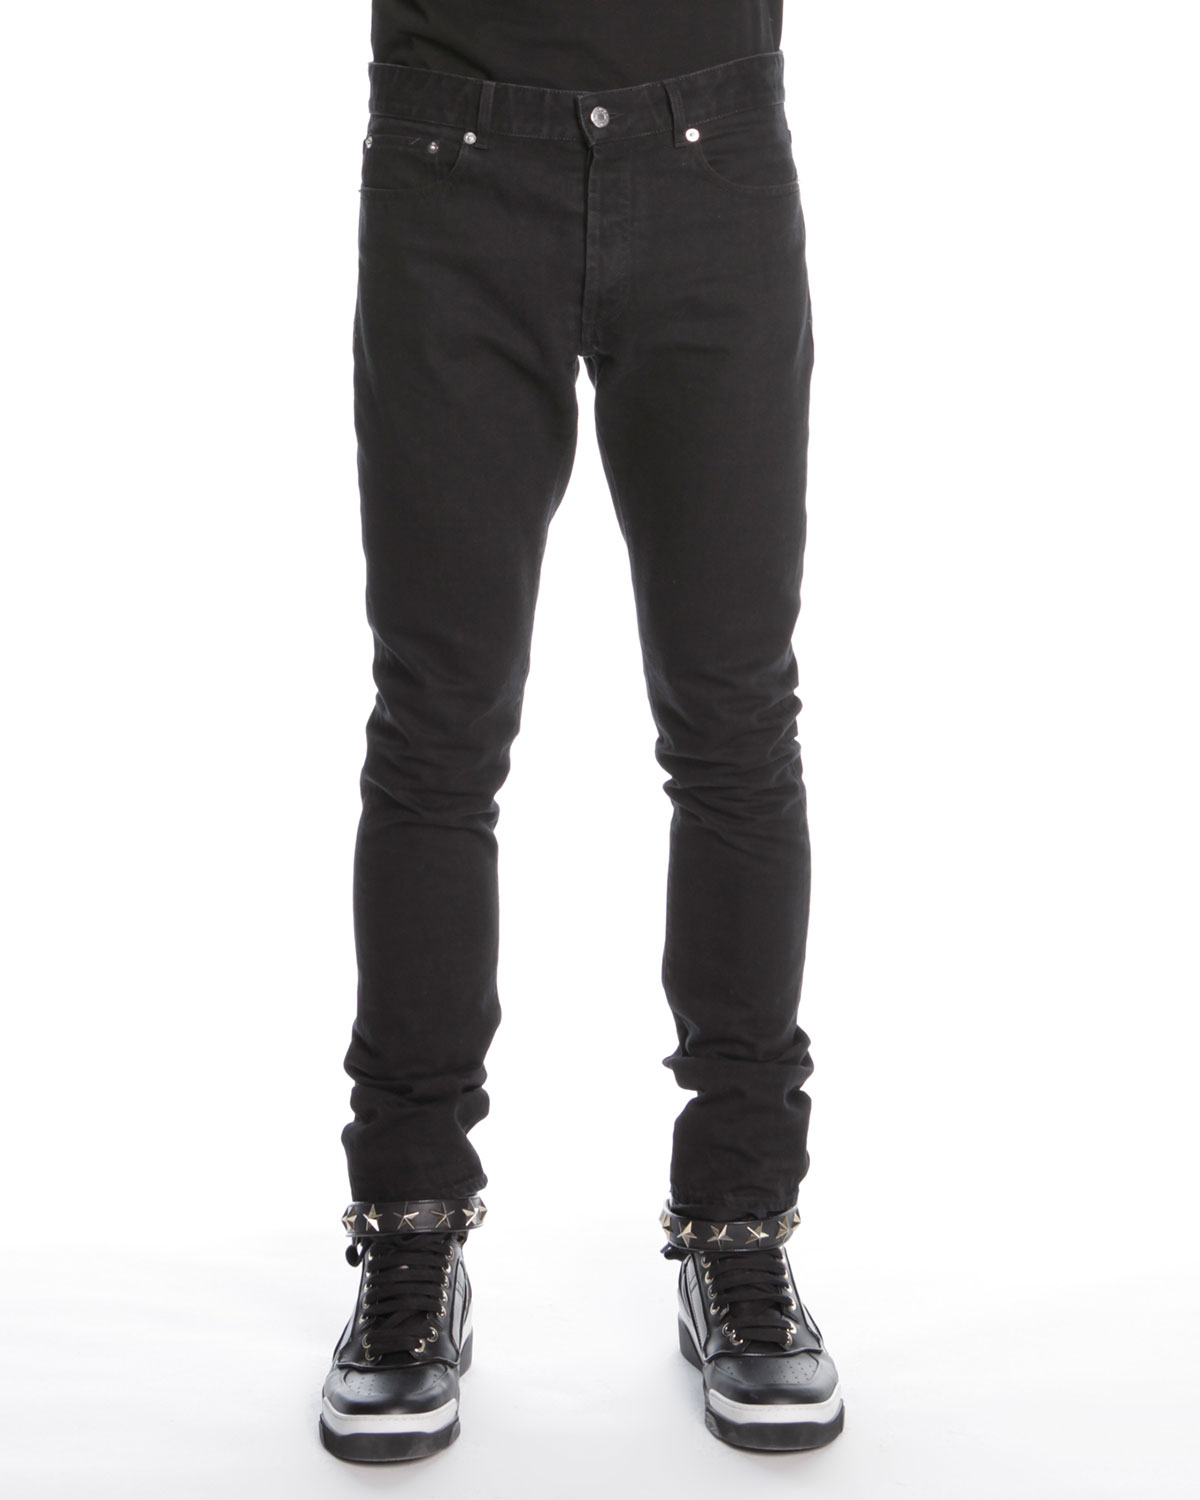 Lyst - Givenchy Jeans in Black